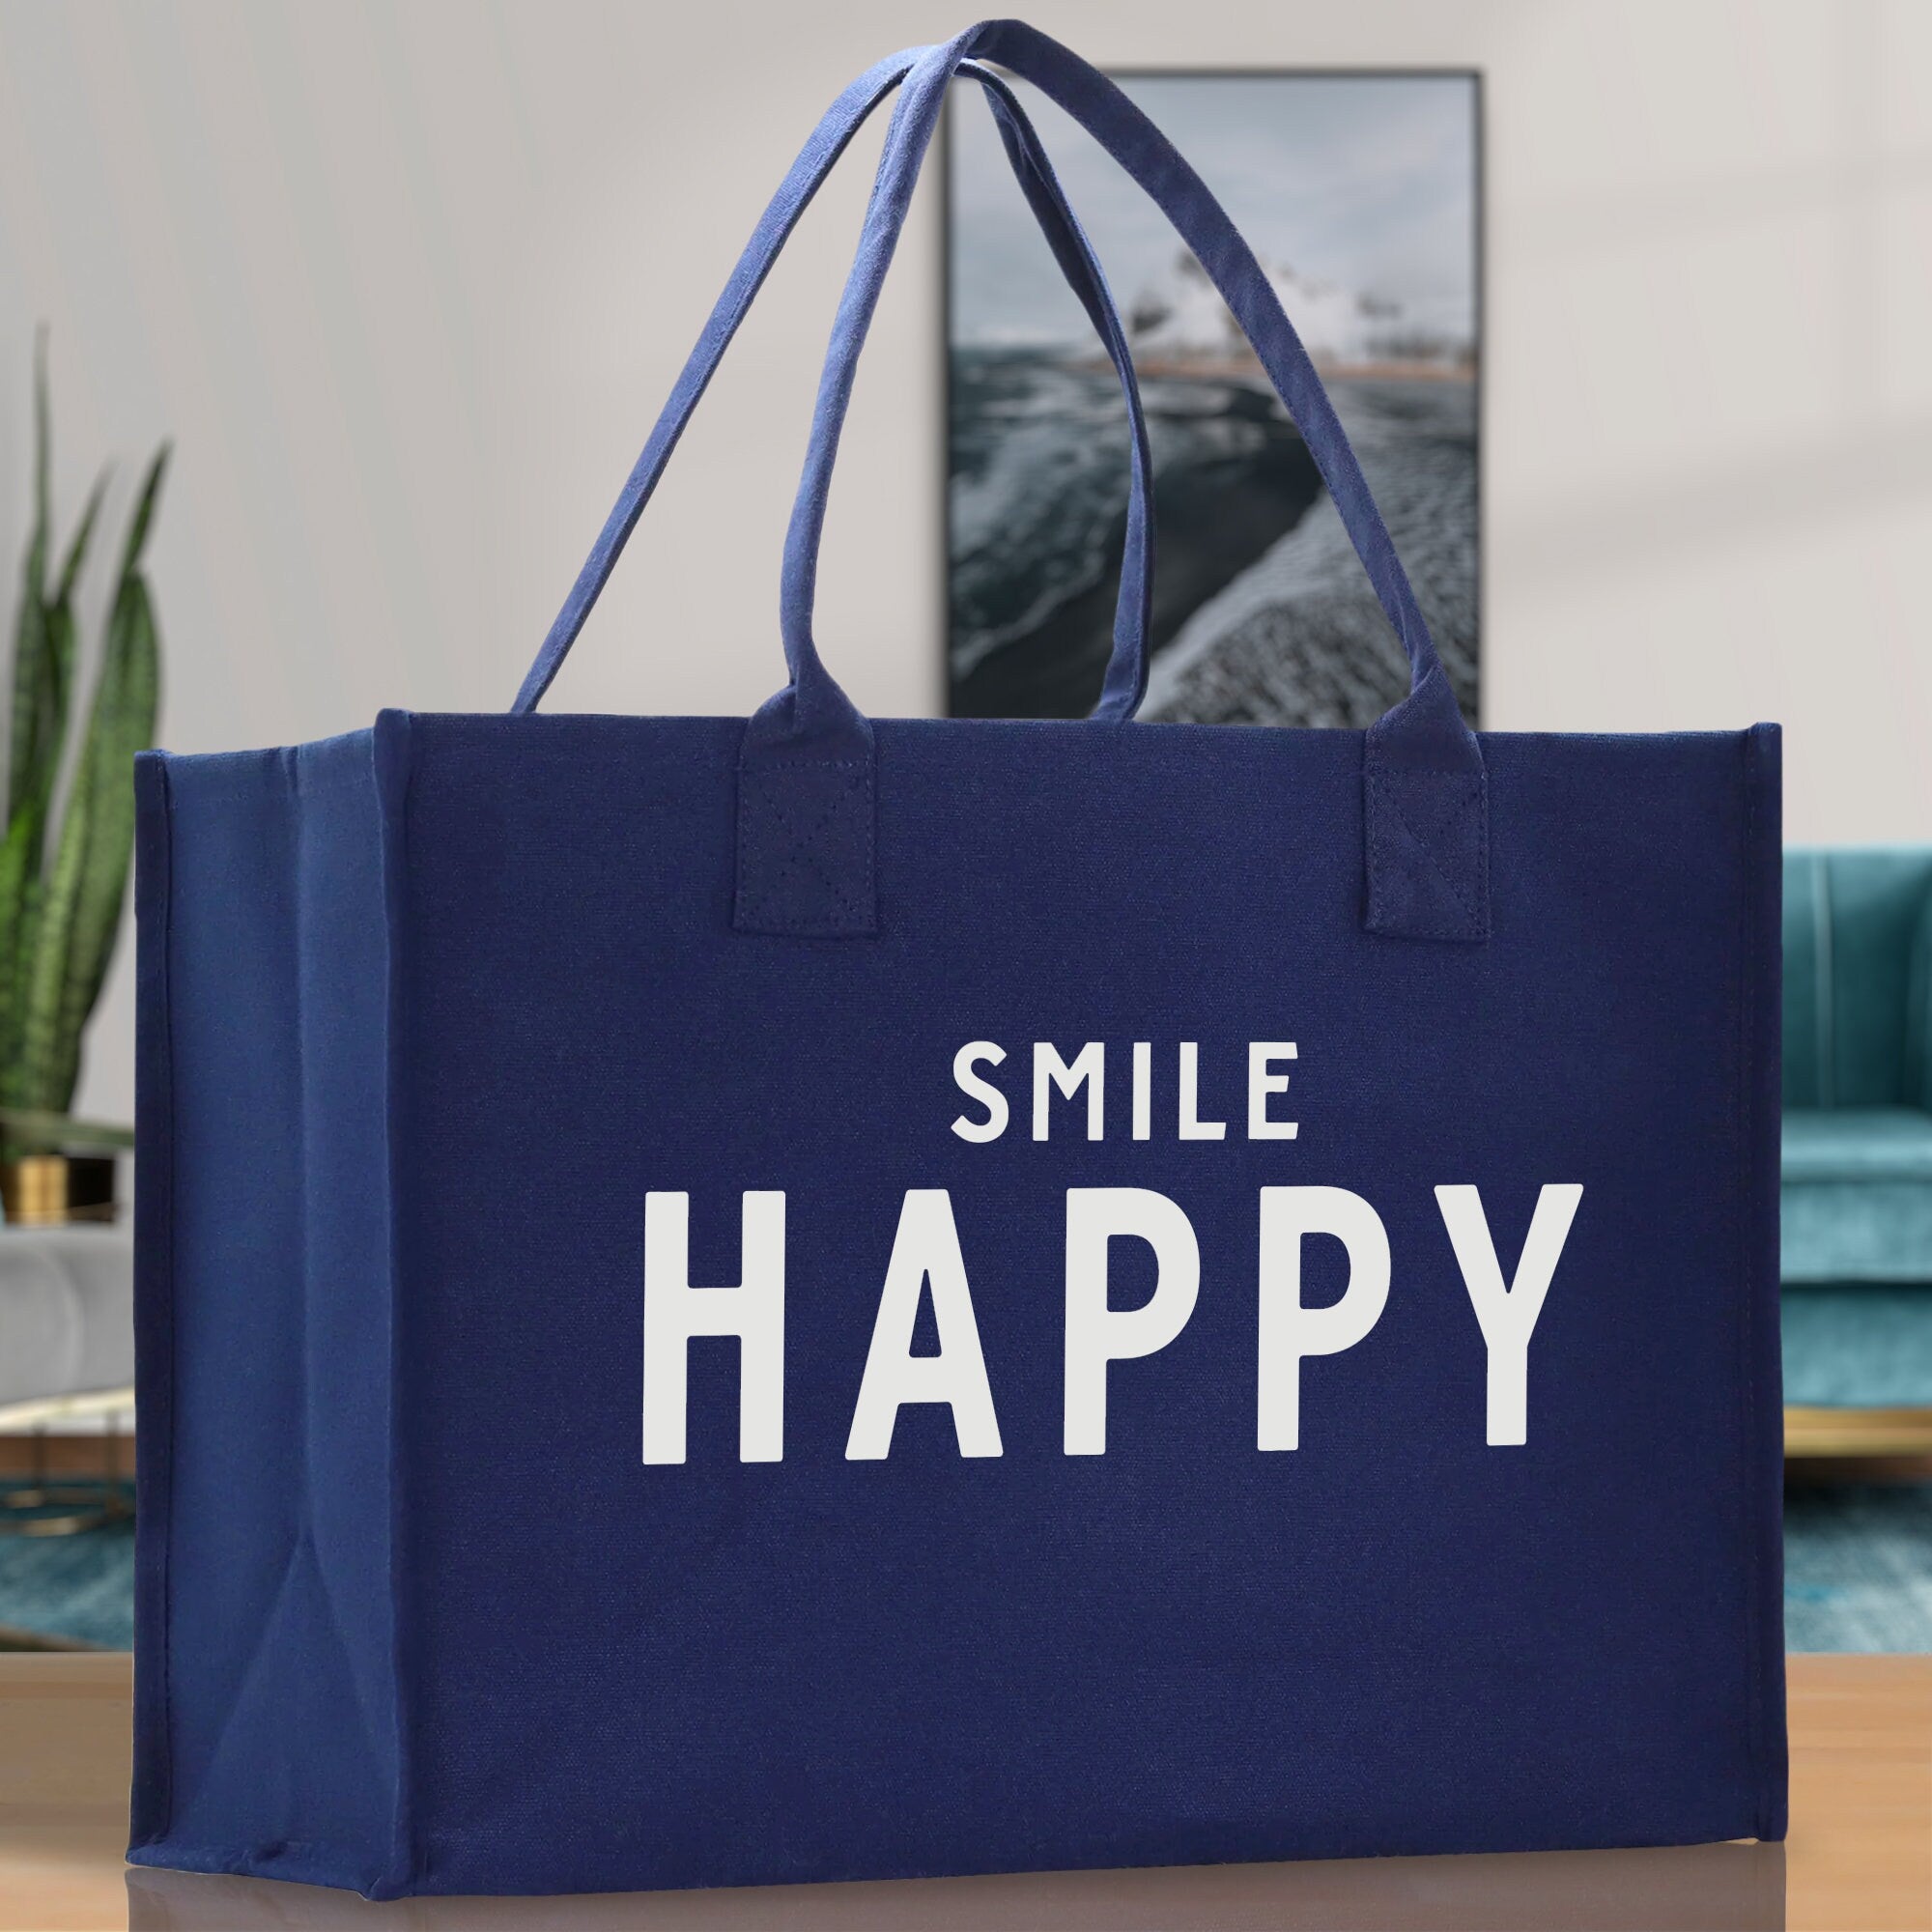 Smile Happy Cotton Canvas Chic Beach Tote Bag Multipurpose Tote Weekender Tote Gift for Her Outdoor Tote Vacation Tote Large Beach Bag